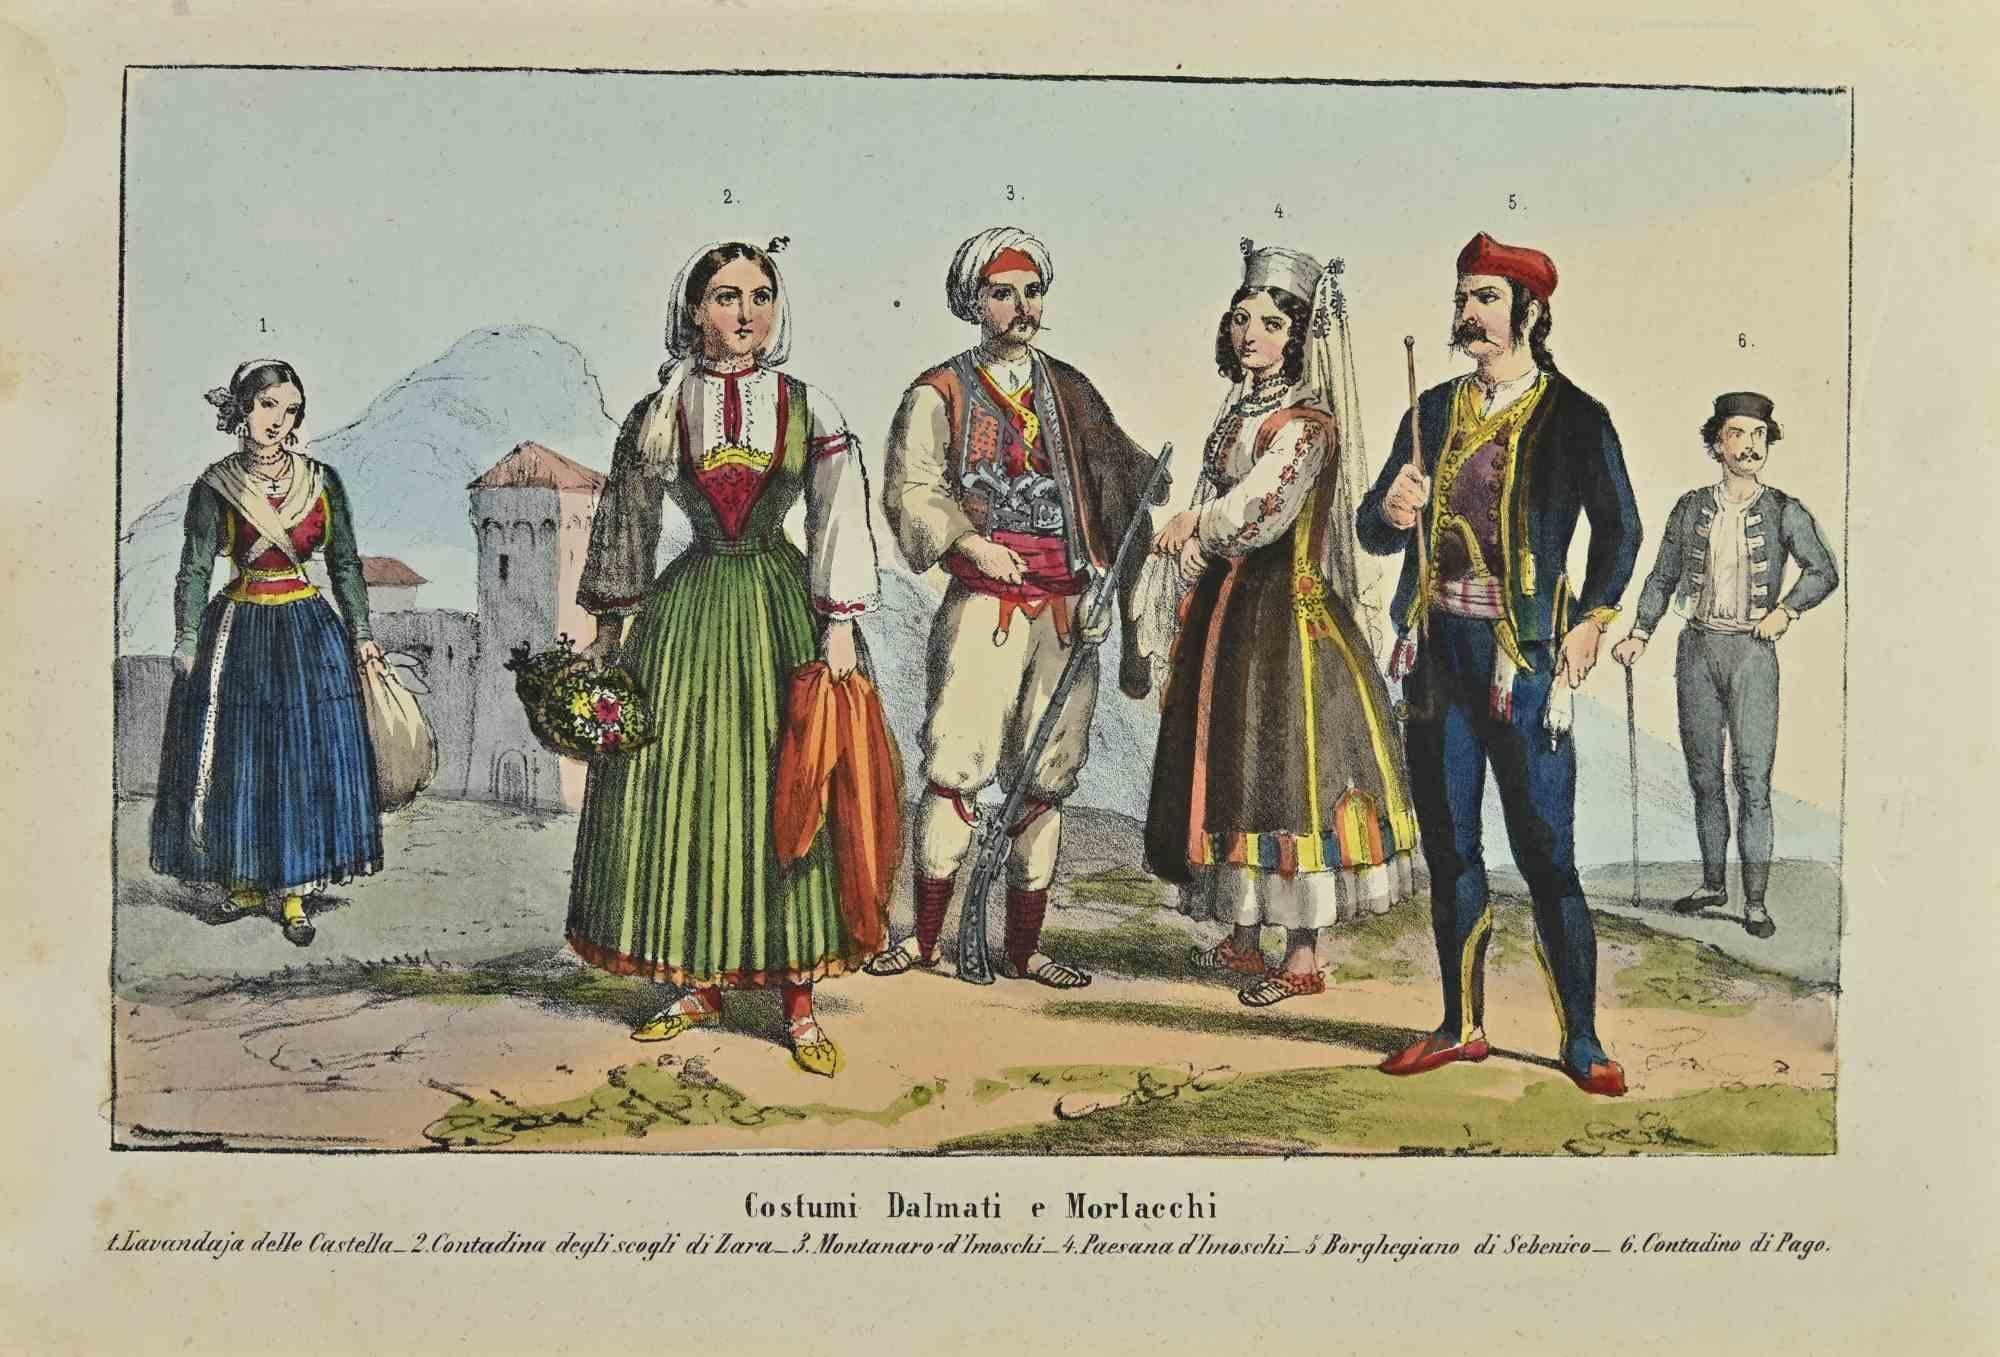 Dalmatian and Morlacchi Customs is a lithograph made by Auguste Wahlen in 1844.

Hand colored.

Good condition.

At the center of the artwork is the original title "Costumi Dalmati e Morlacchi"

The work is part of Suite Moeurs, usages et costumes